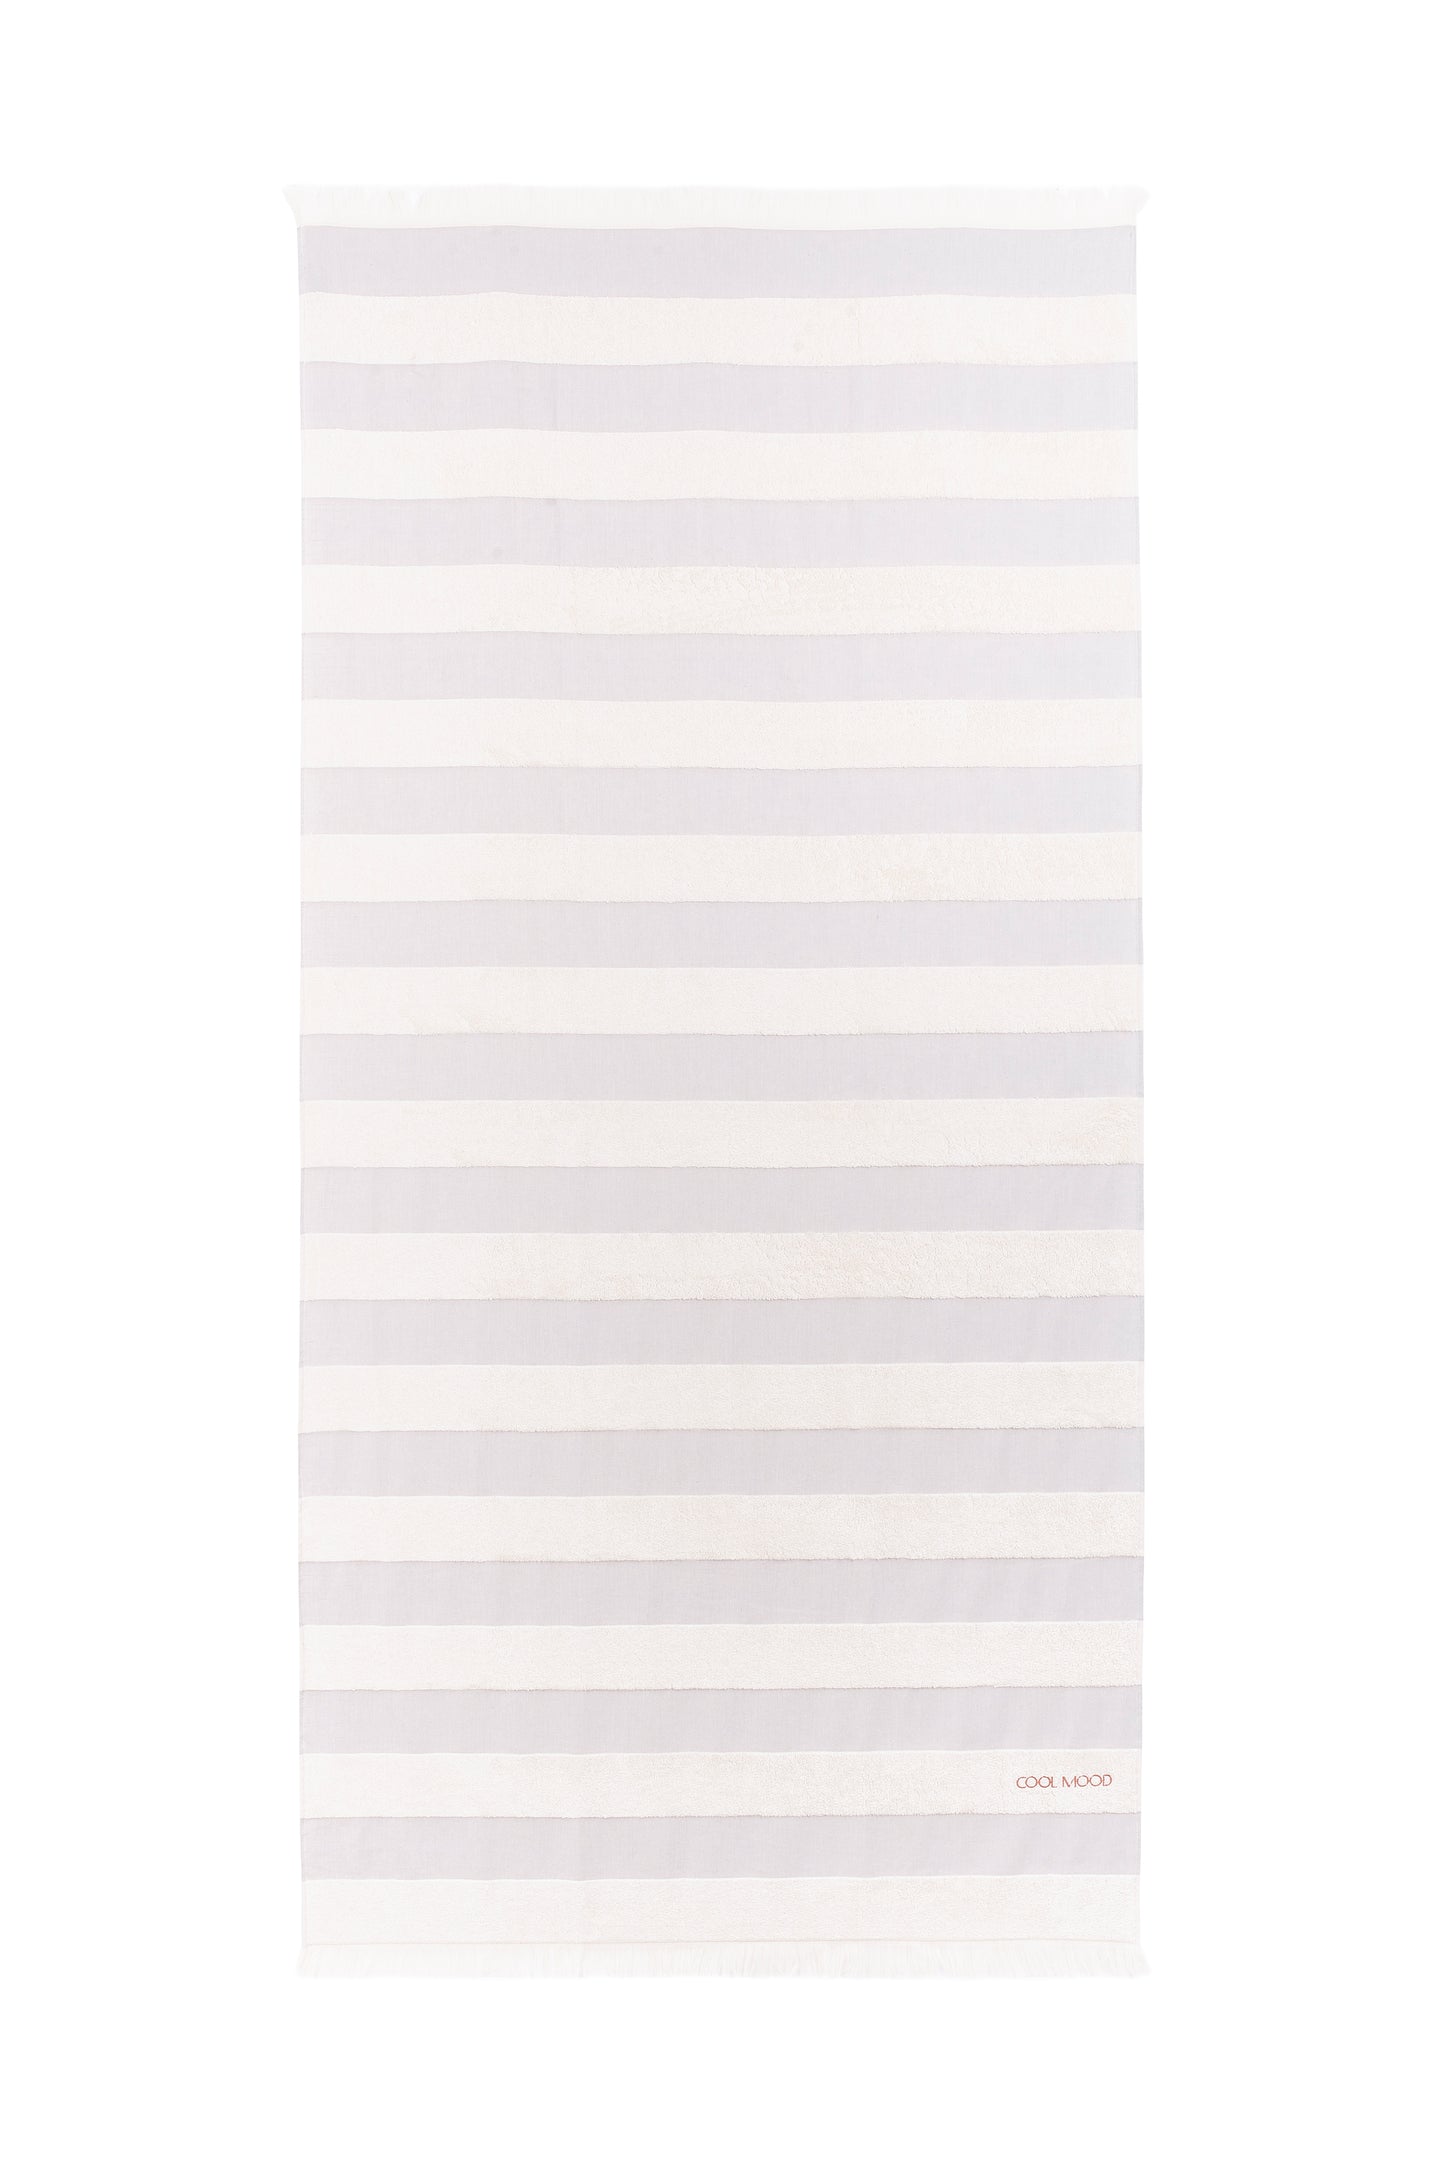 Beach towel in grey shade, with soft terry stripes